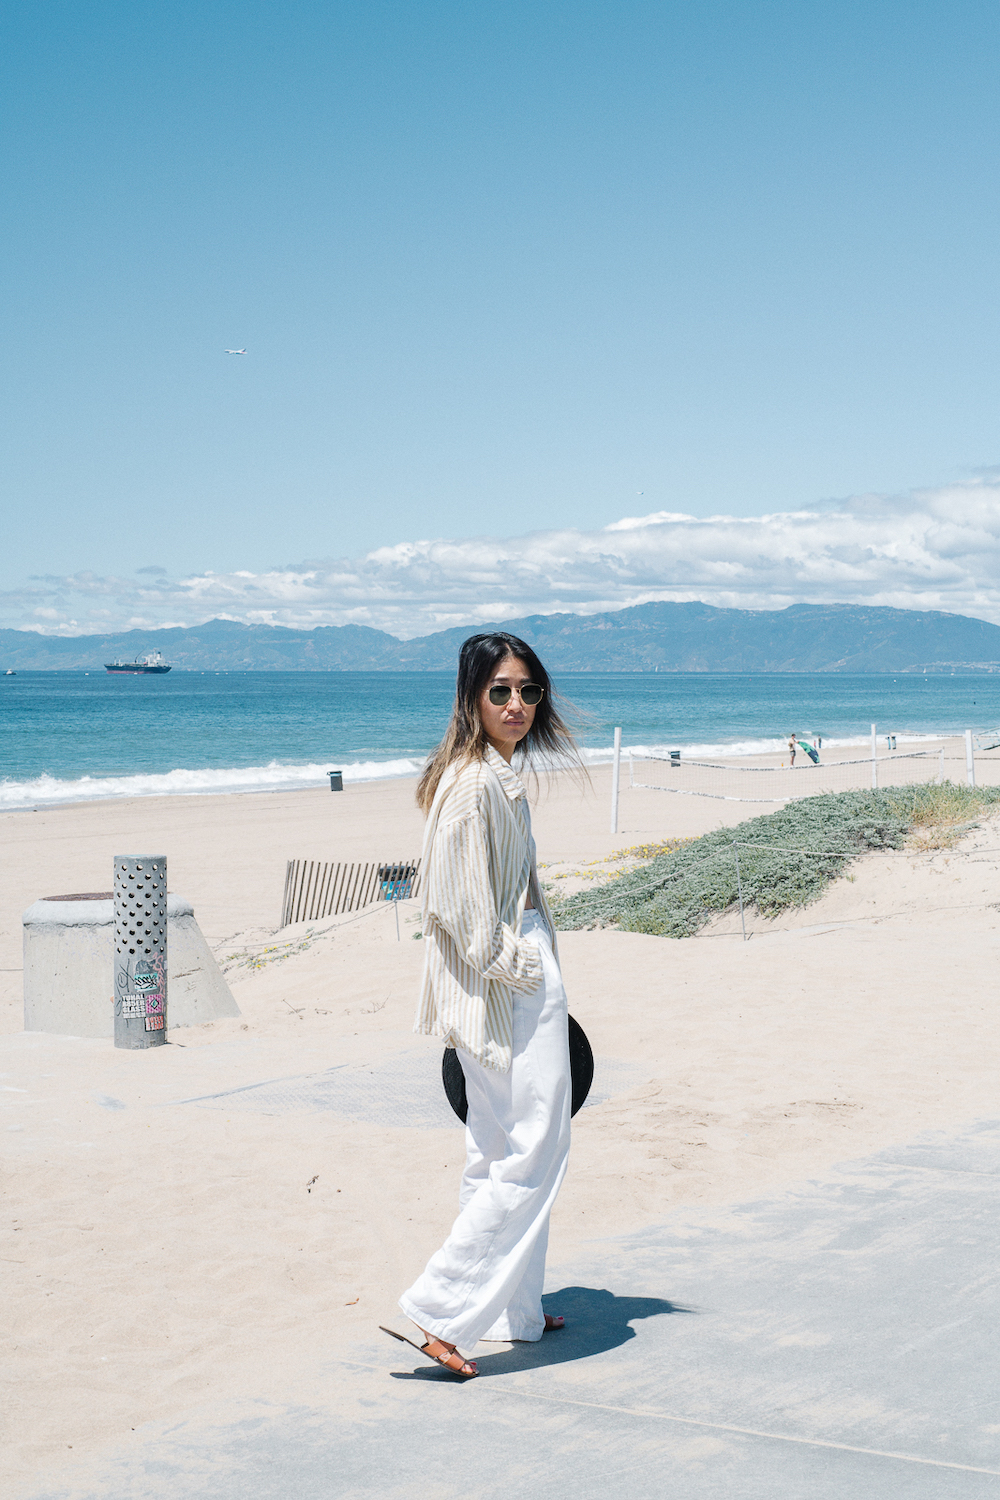 Jennie Yoon wearing white linen shirt and pants on the beach.